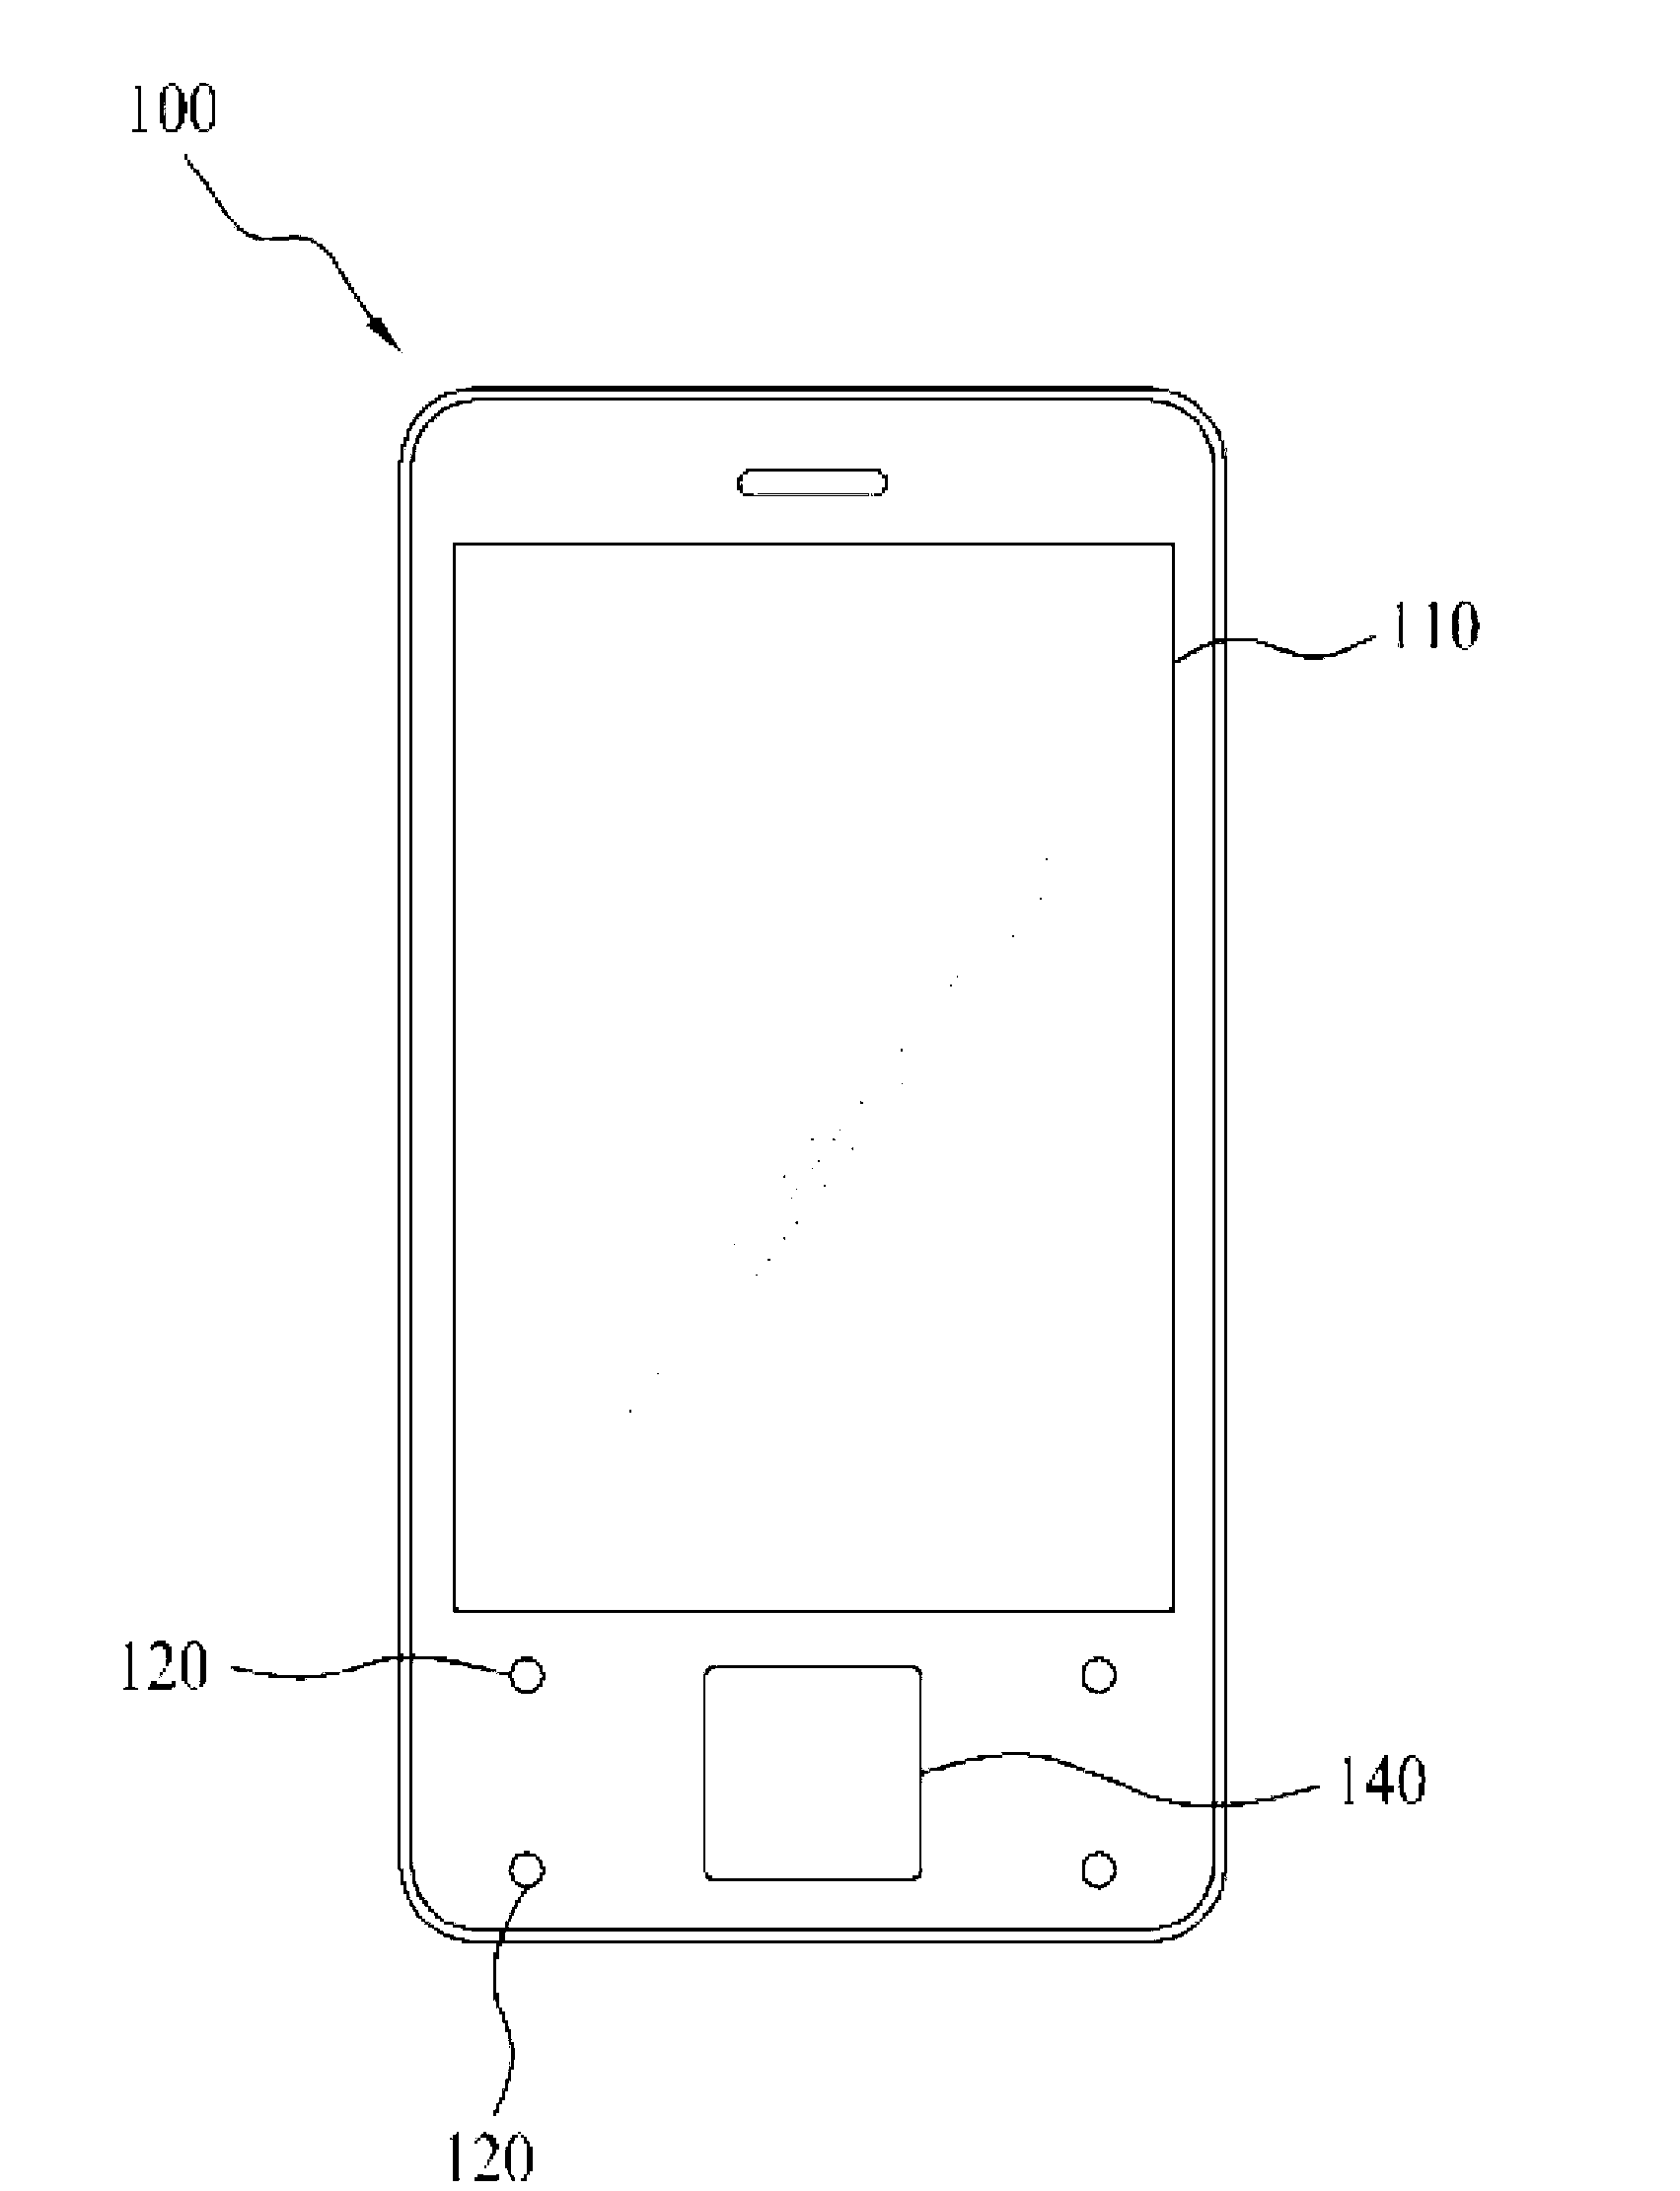 Device and method for detecting movement using proximity sensor